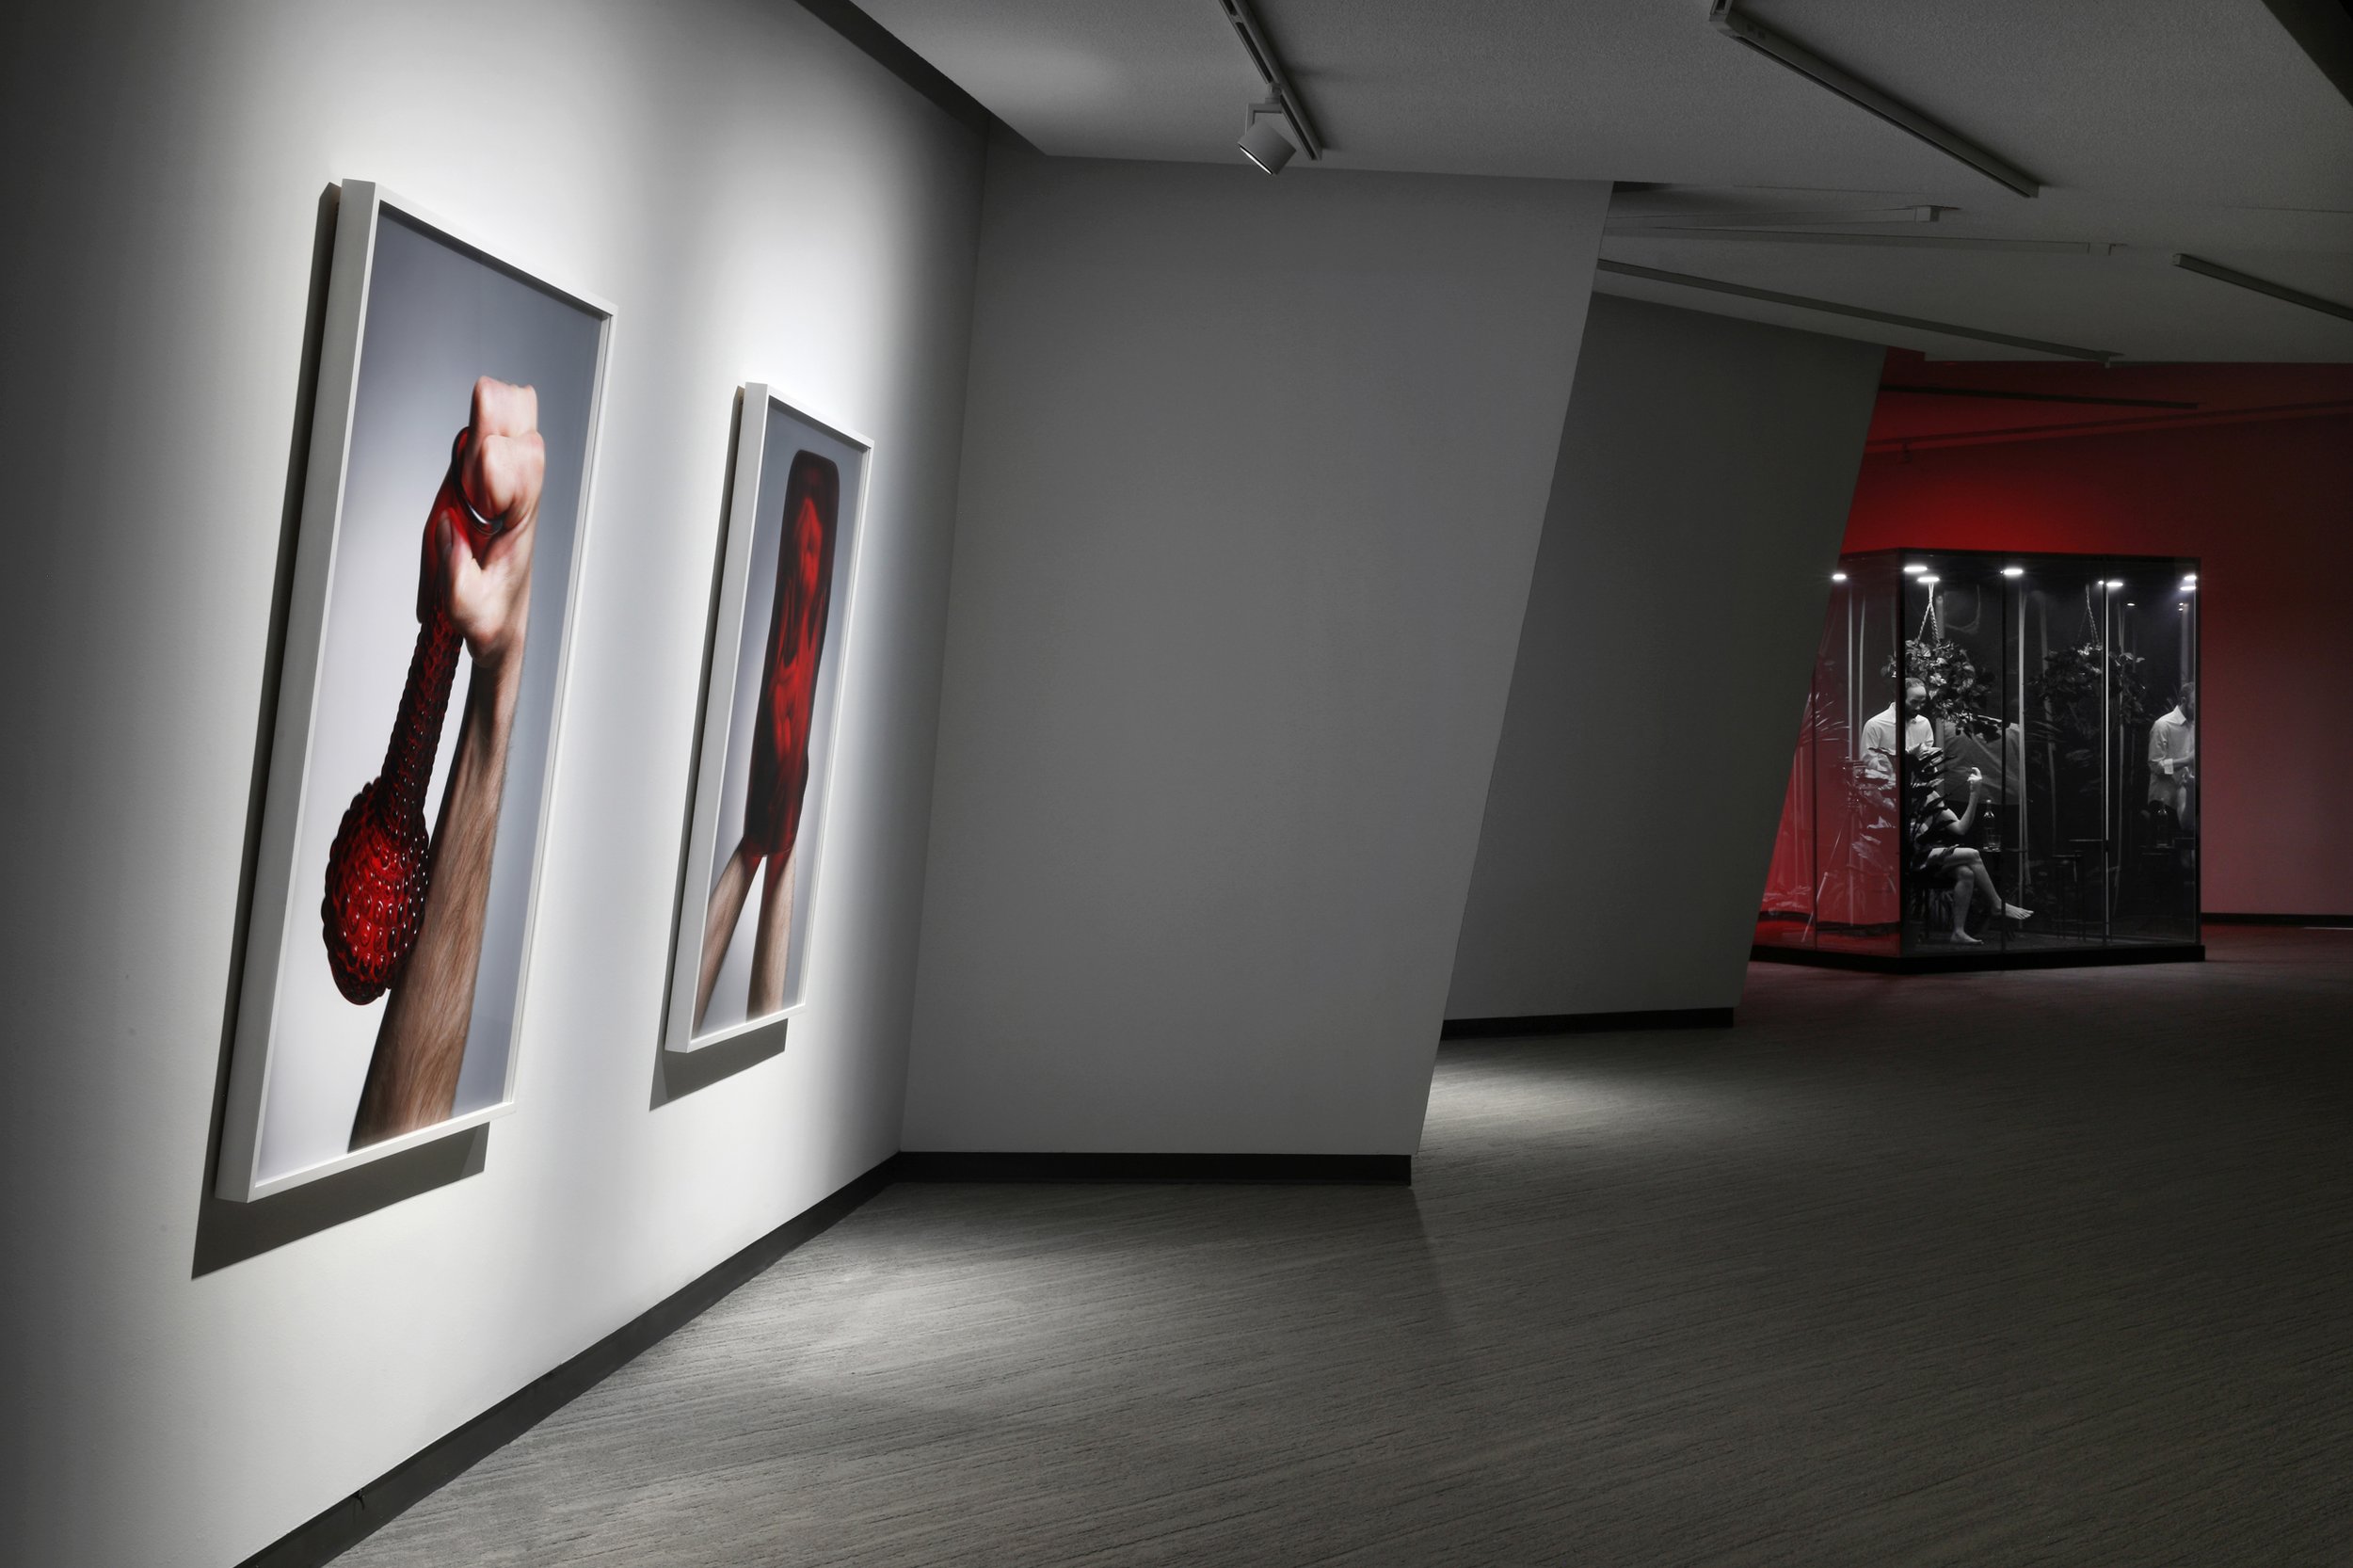   Handle  (2009) chromogenic prints 55” x 40”   Self Portrait with Luis Jacob  (2022) silicon sculptures and furnishings, in mirror cube structure 8’ x 8” x 8’  Installation view of  That, There, It  at Contemporary Calgary, Canada 